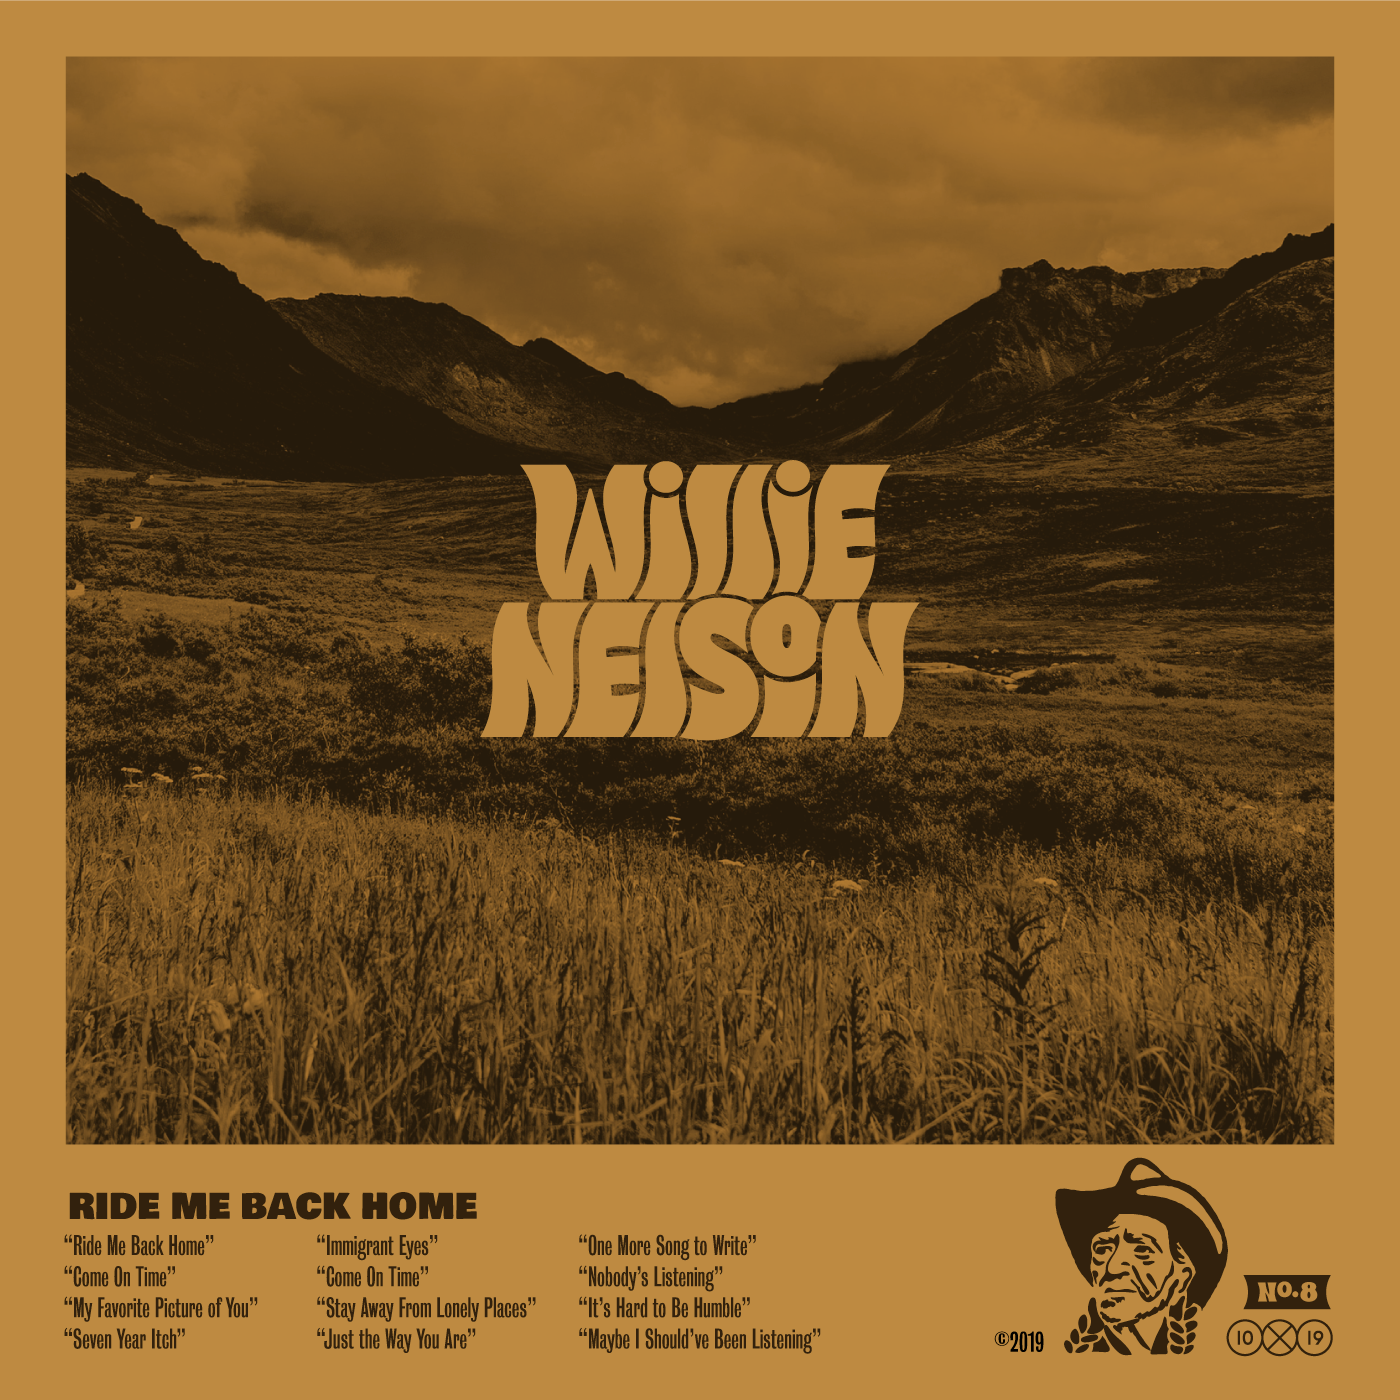 Willie Nelson album cover by Jen Hood for 10x19